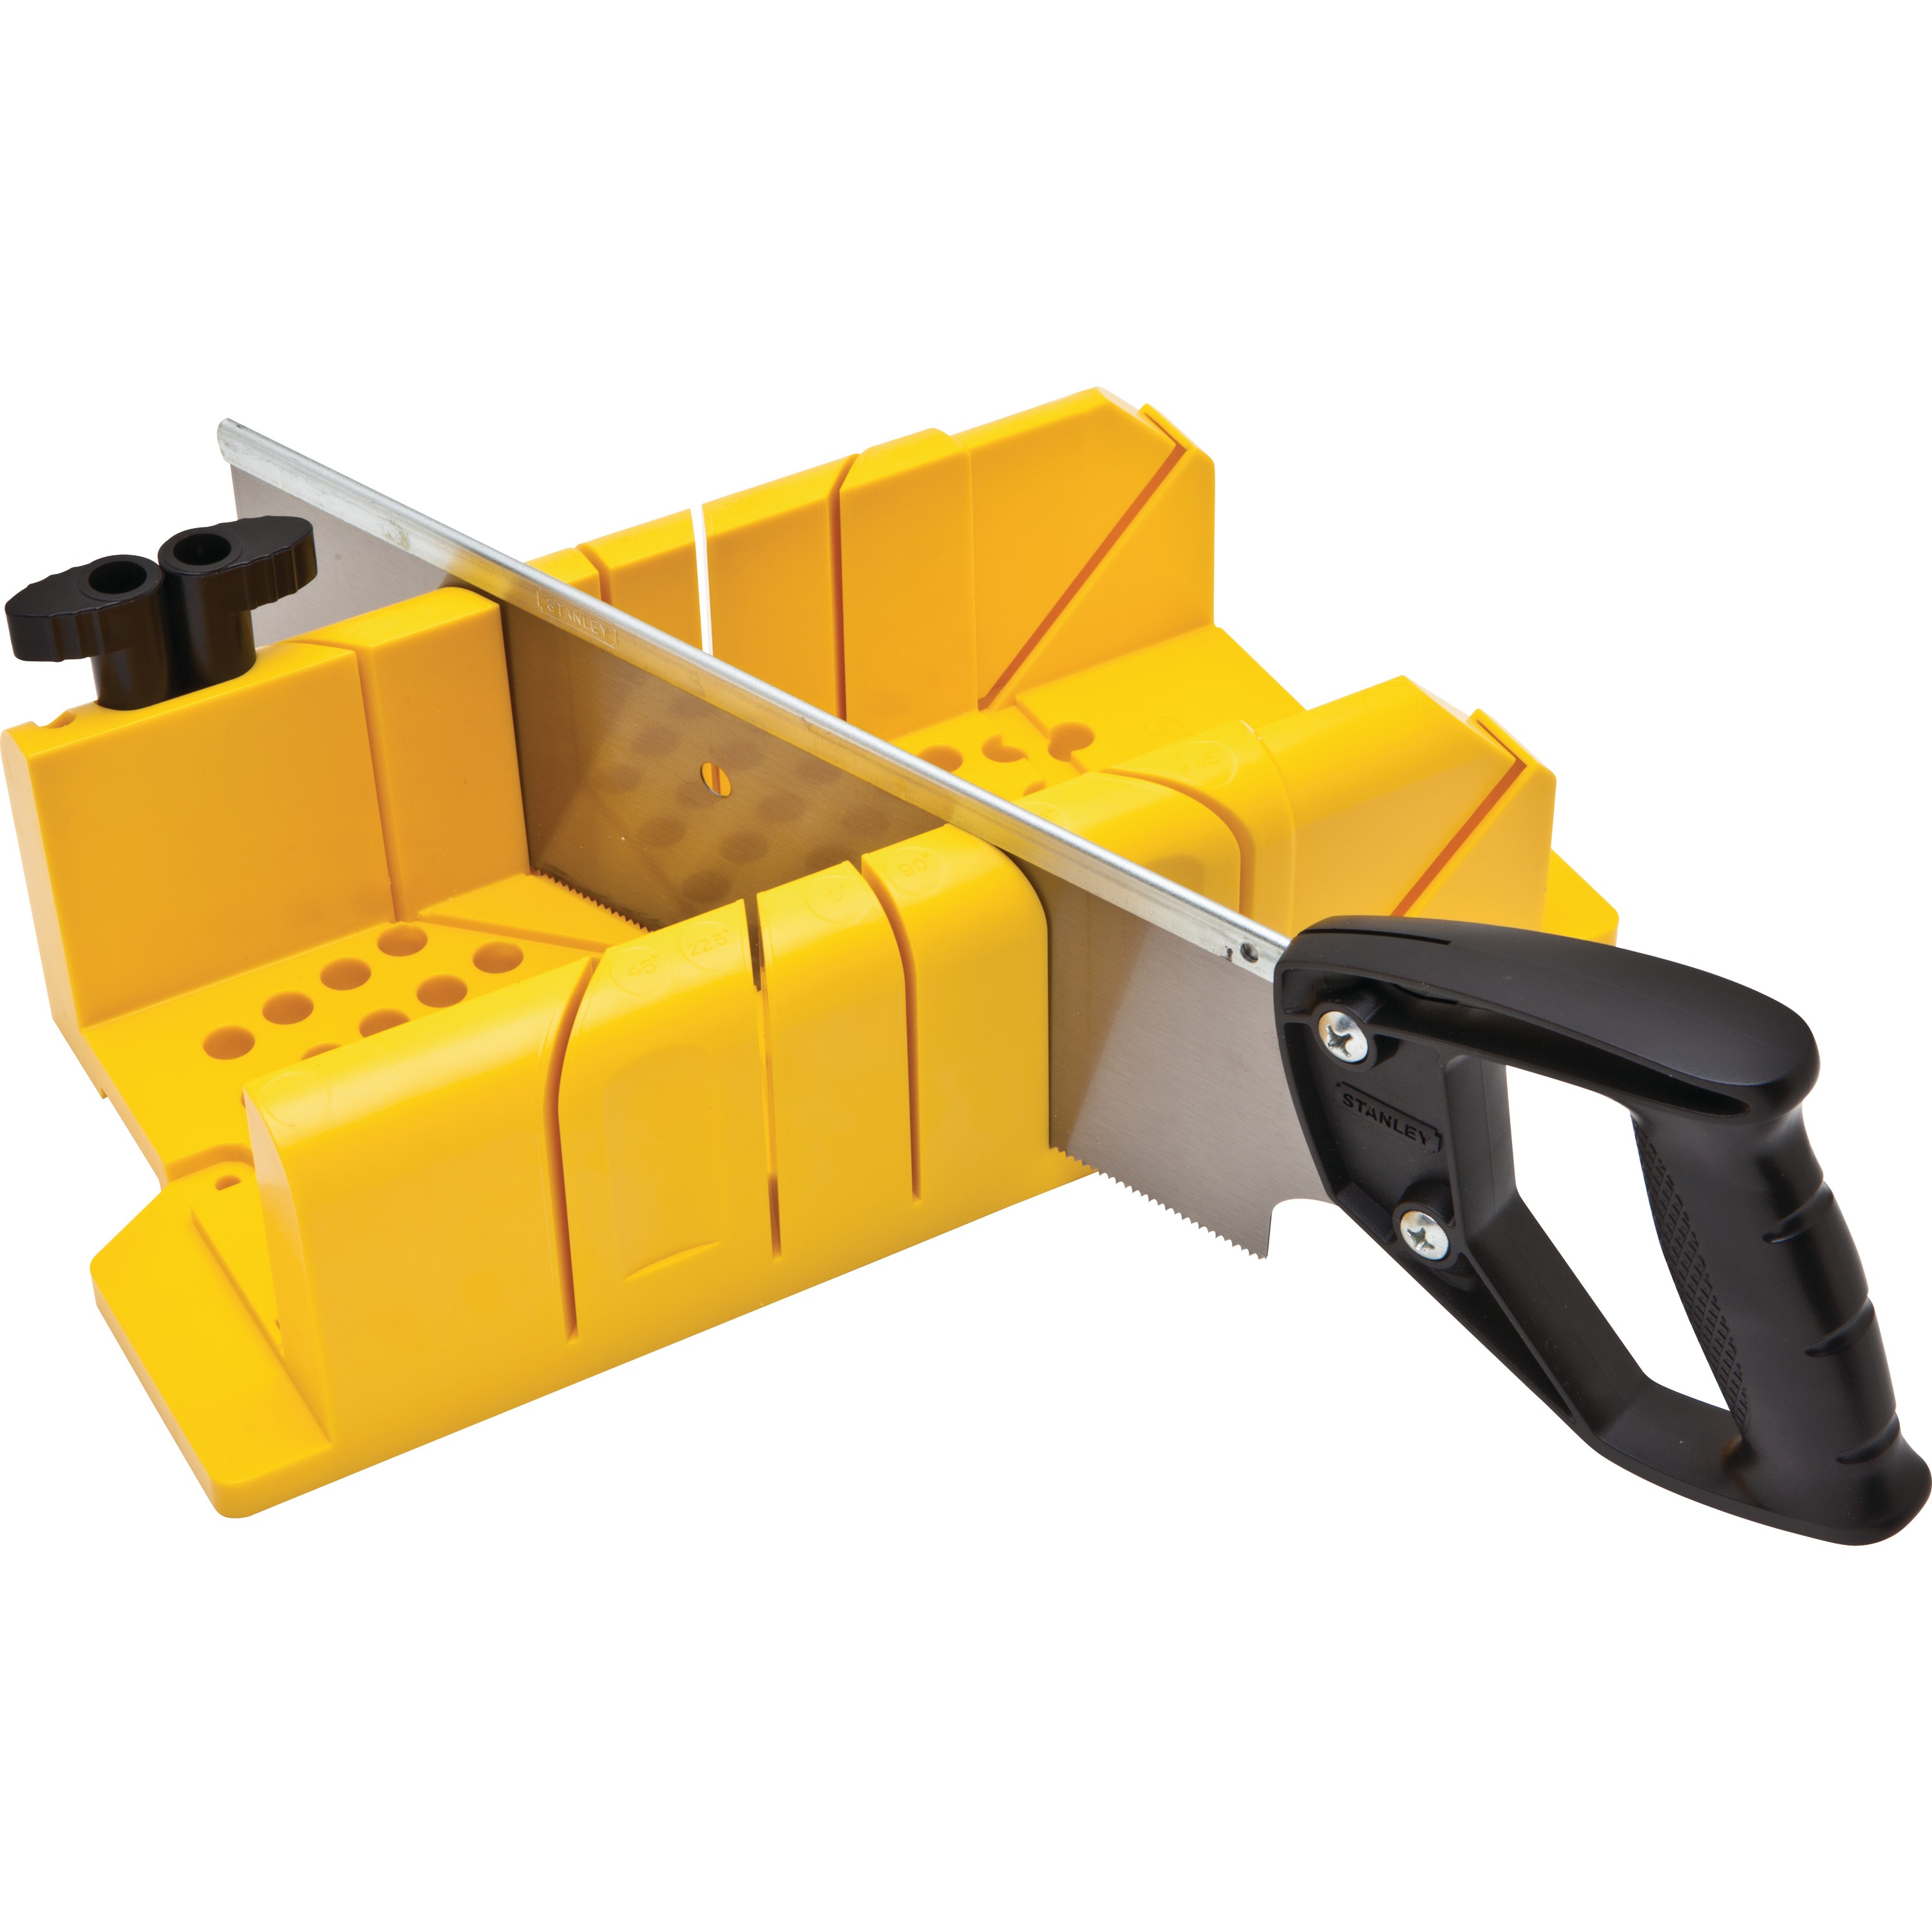 Stanley Tools - Clamping Miter Box with 14 in Saw - 20-600